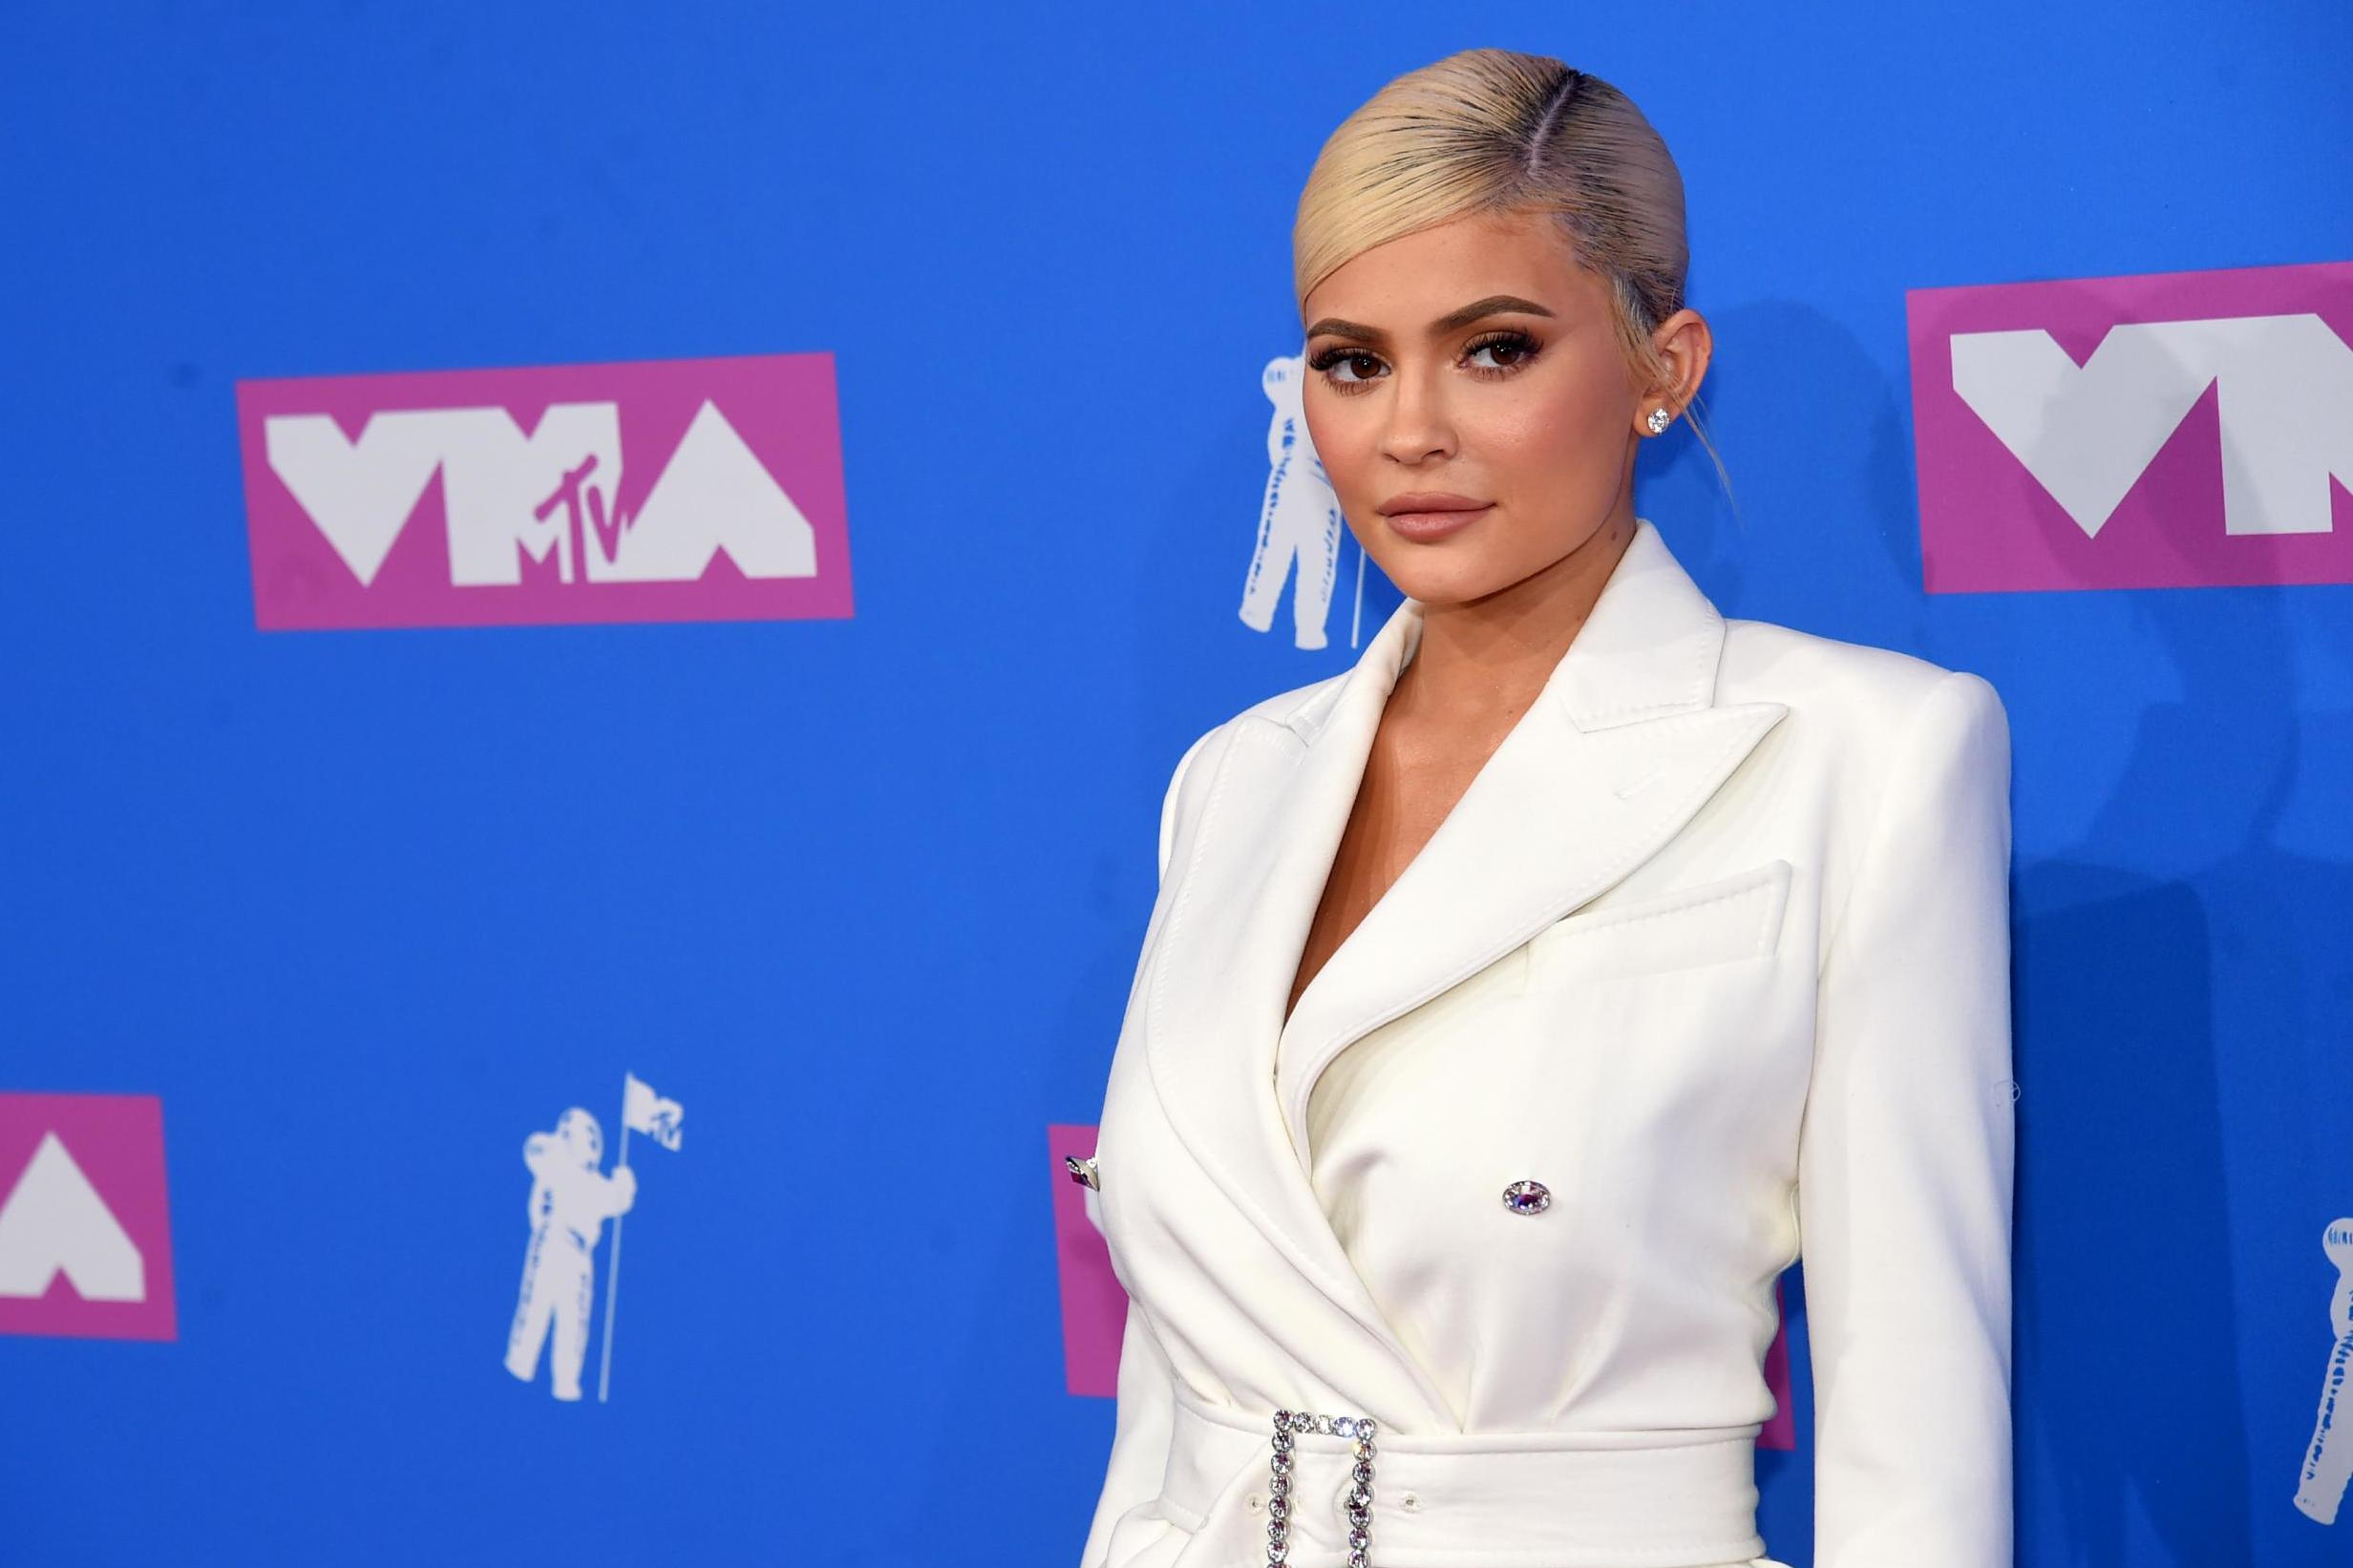 Kylie Jenner has spoken of post partum insecurity